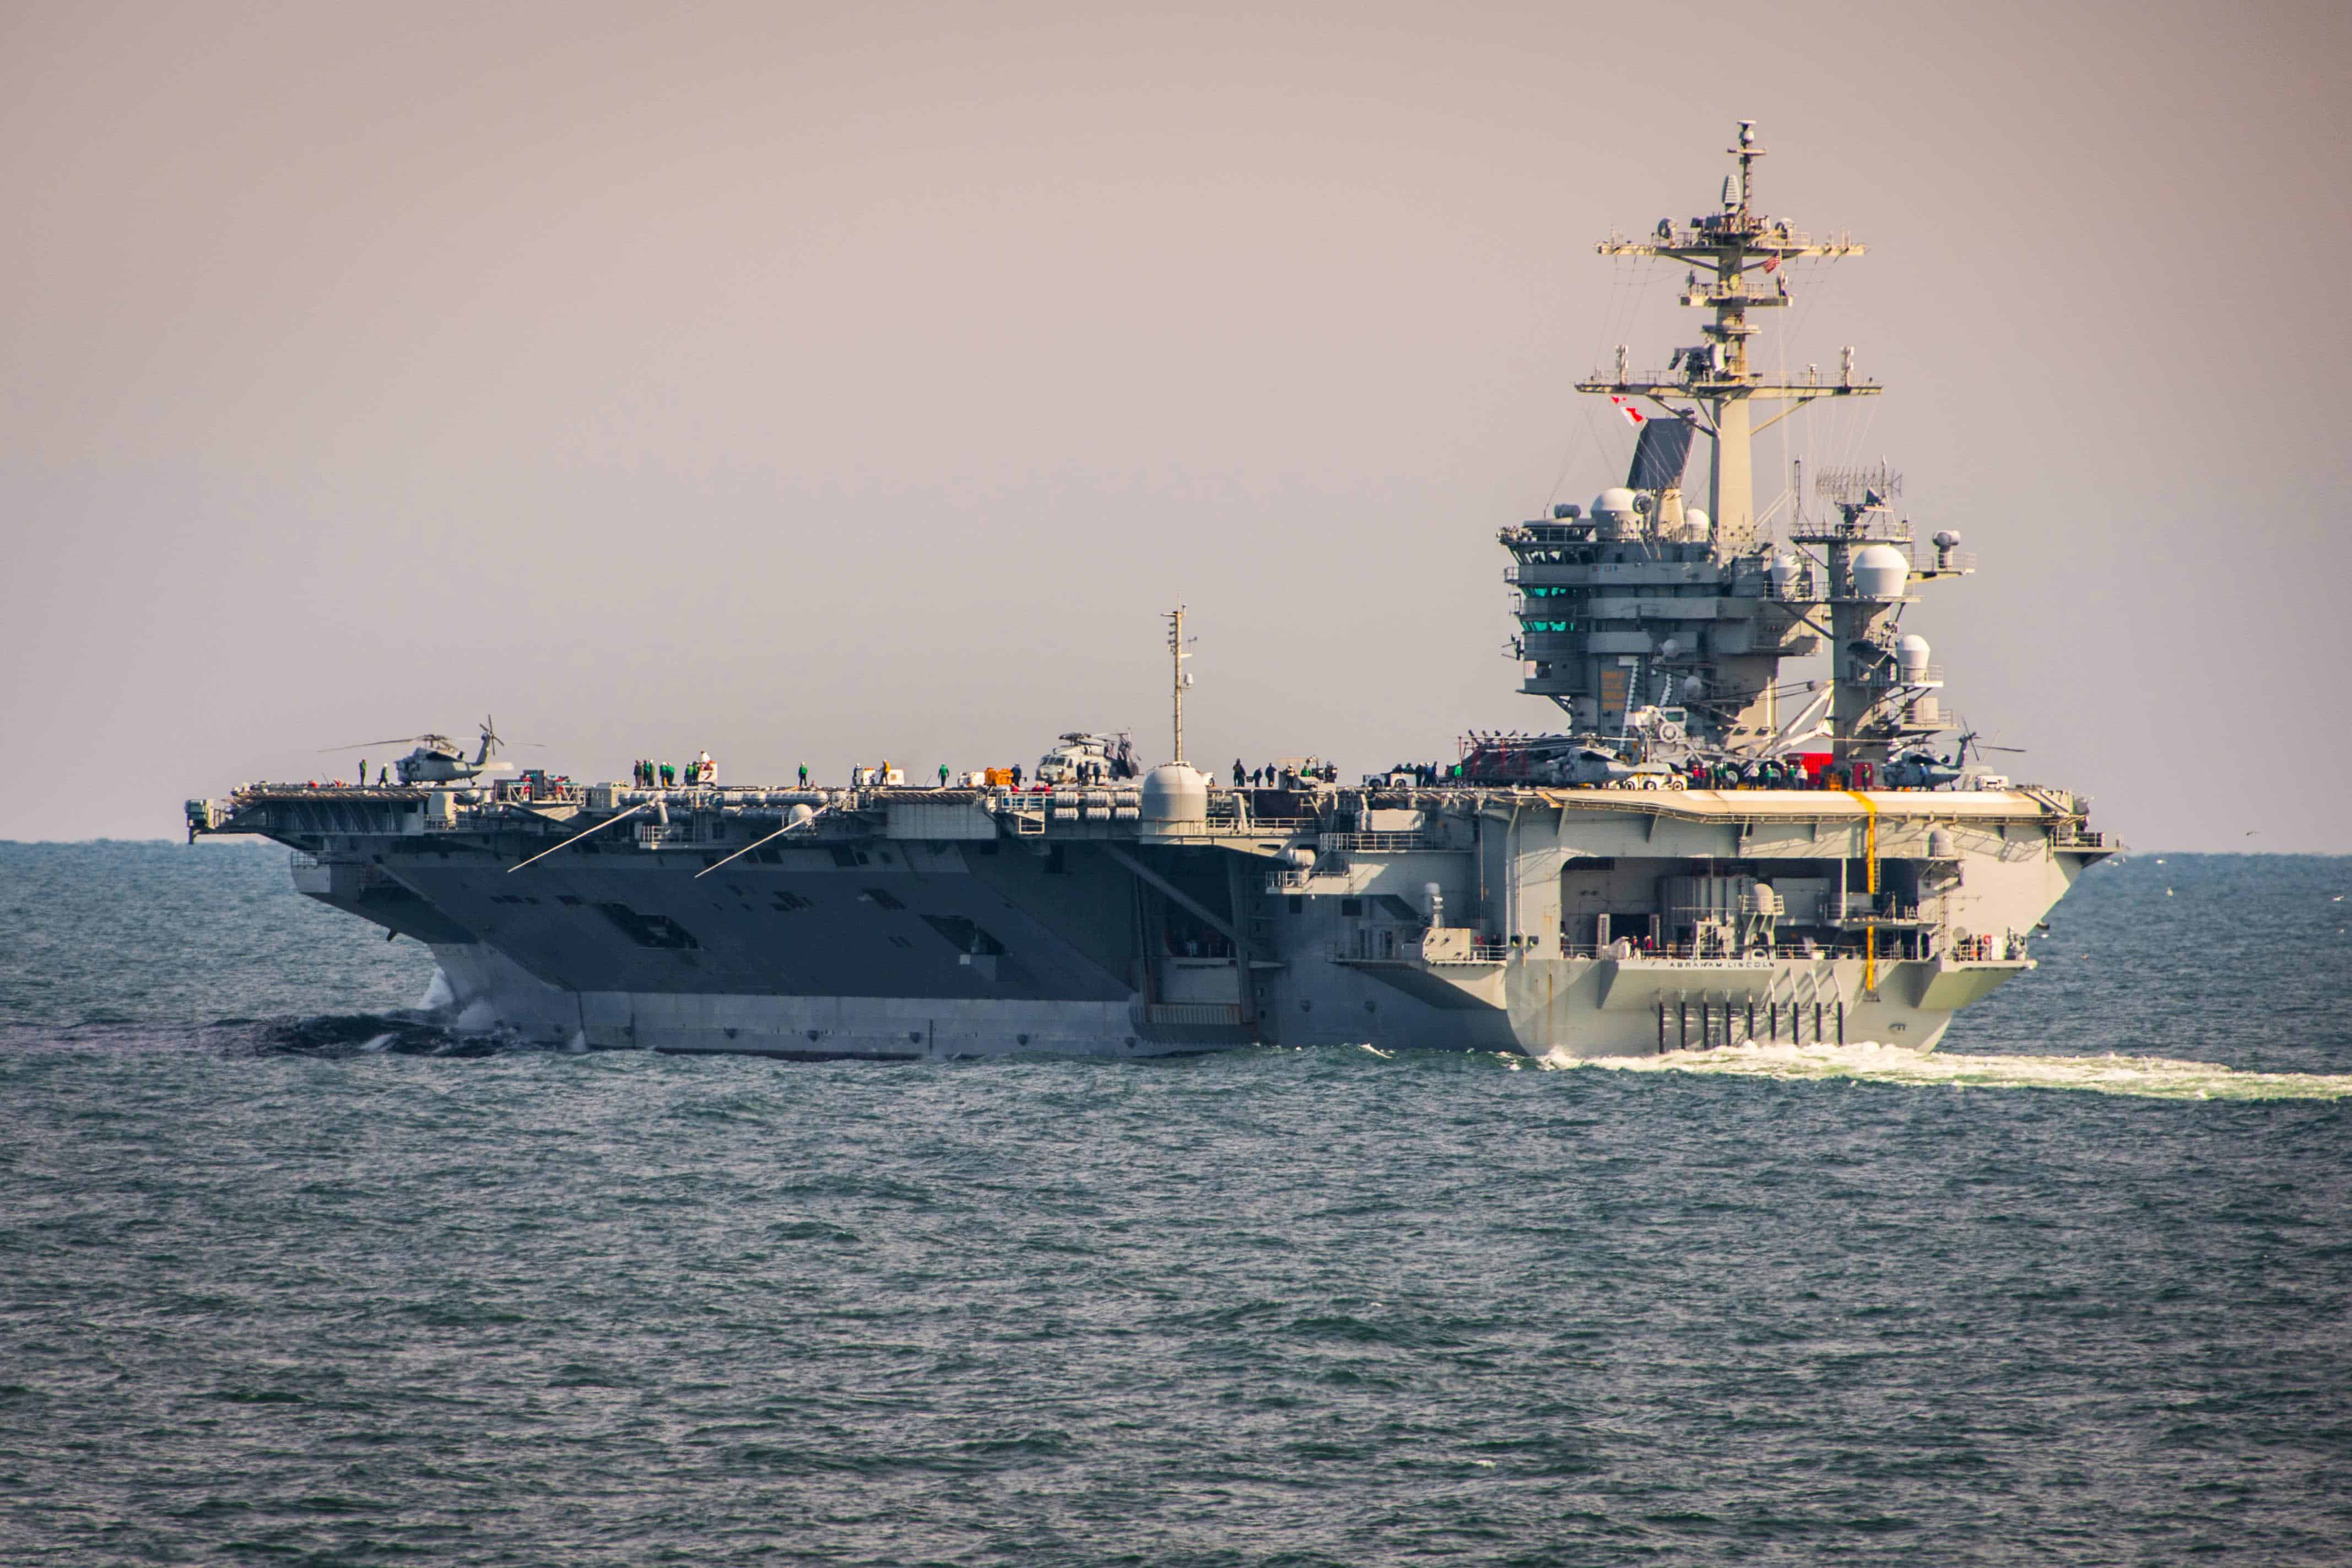 ATLANTIC OCEAN (April 1, 2019) The aircraft carrier USS Abraham Lincoln (CVN 72) embarks on a deployment that will send them around the world and include a homeport change to San Diego.